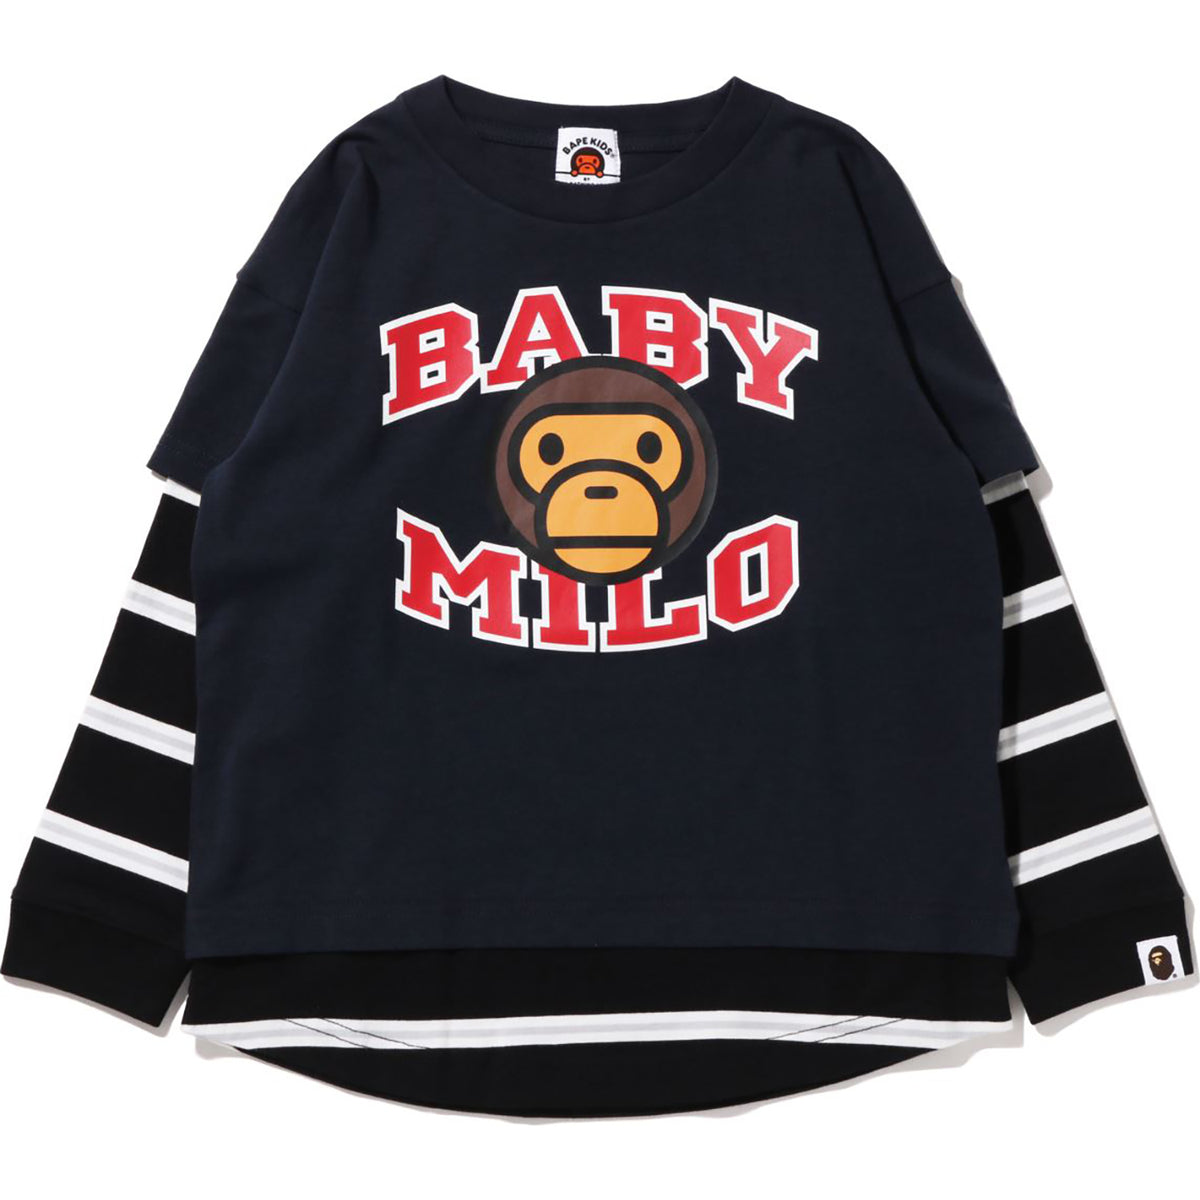 BABY MILO COLLEGE LAYERED LOOSE FIT L/S KIDS